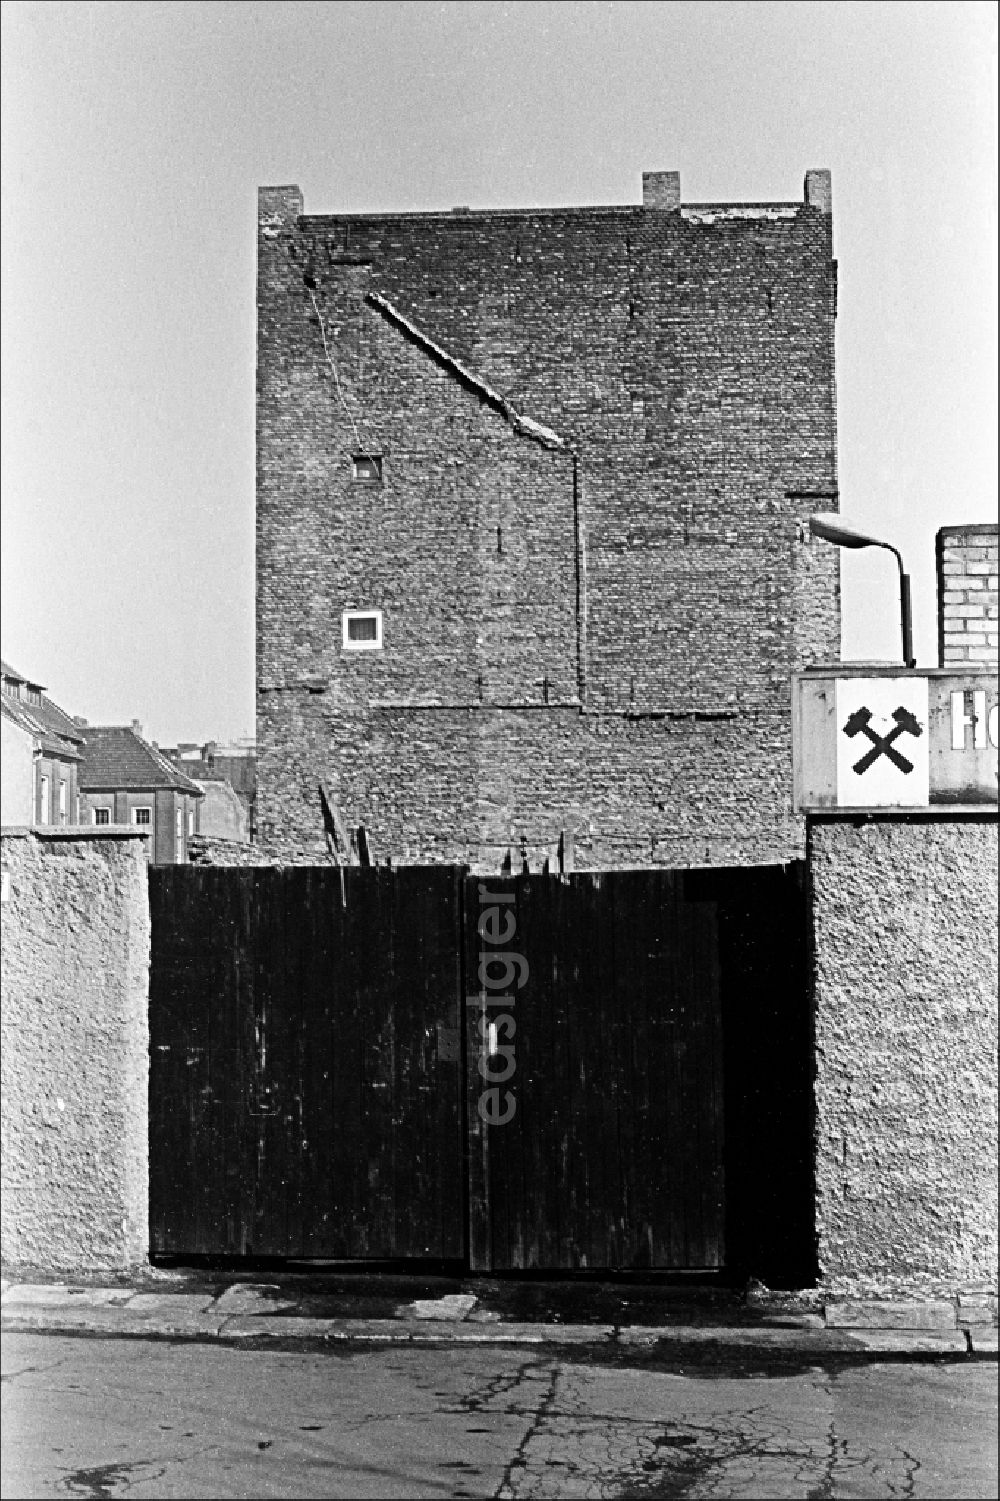 GDR image archive: Berlin - Gate to the entrance area of the coal trade on Steinstrasse in the Mitte district of Berlin East Berlin in the territory of the former GDR, German Democratic Republic